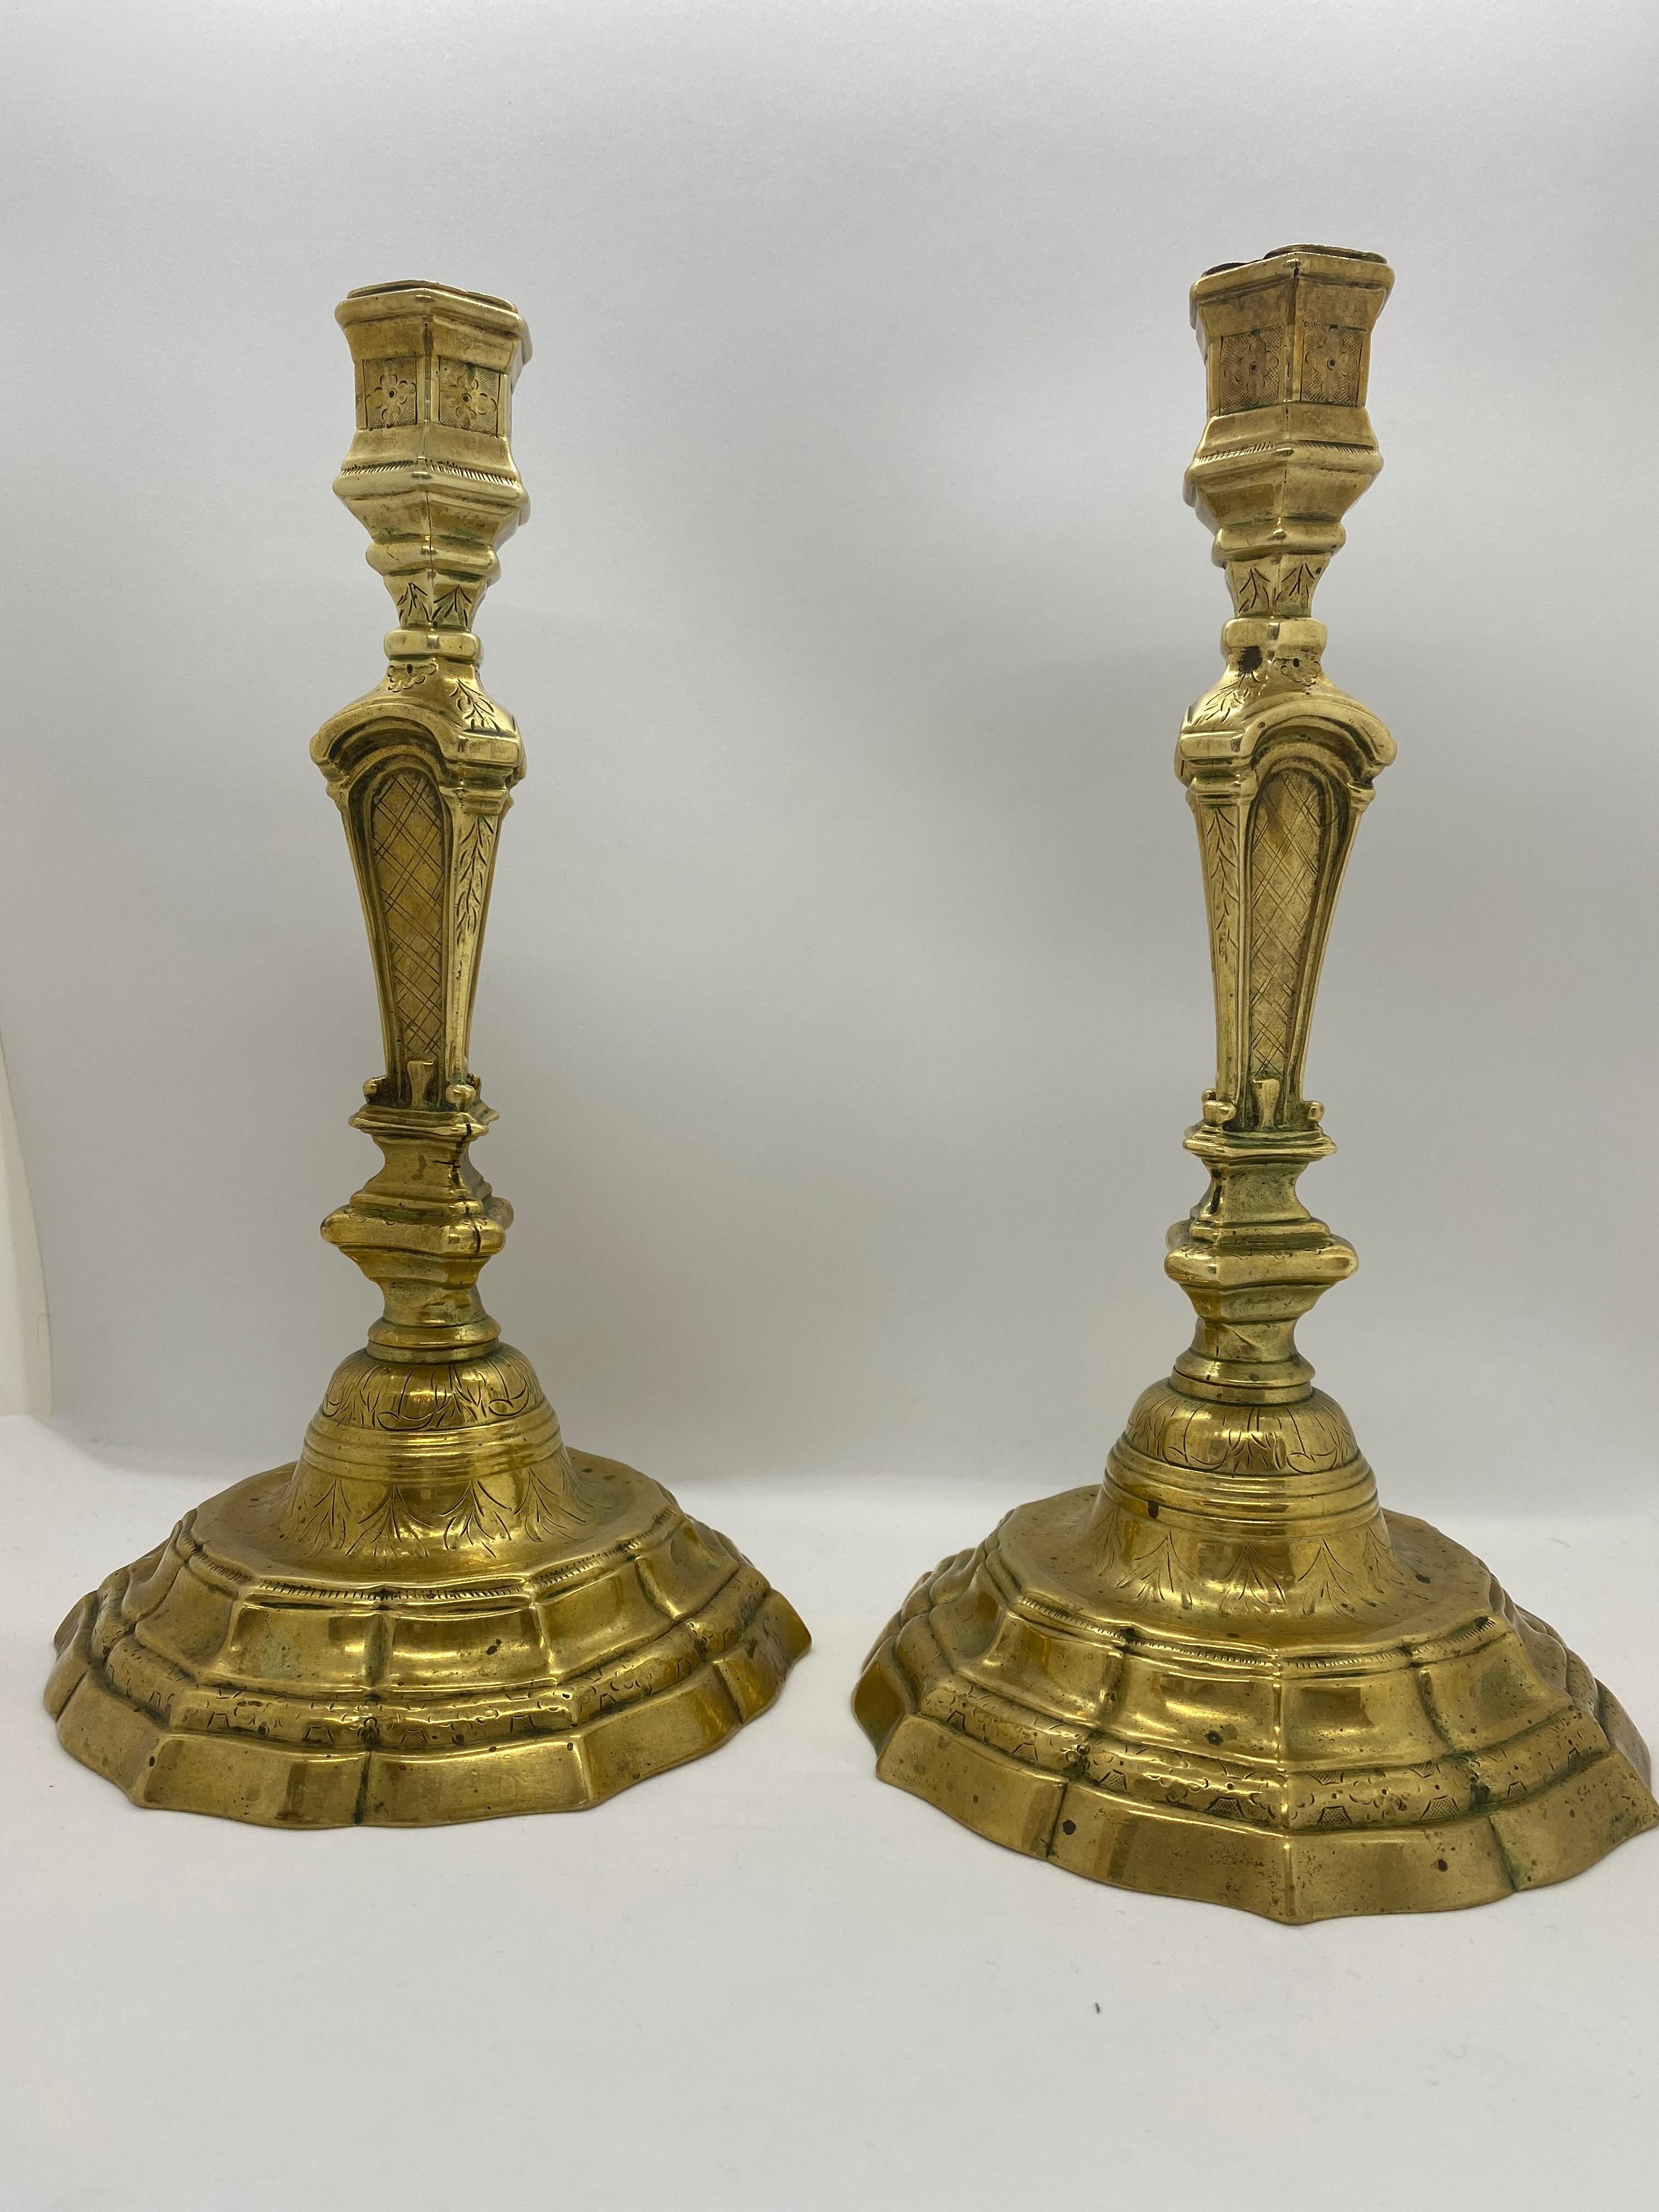 A pair of 18th century candlesticks, French. Originally these have been silvered but the silver is now al worn away except small traces.